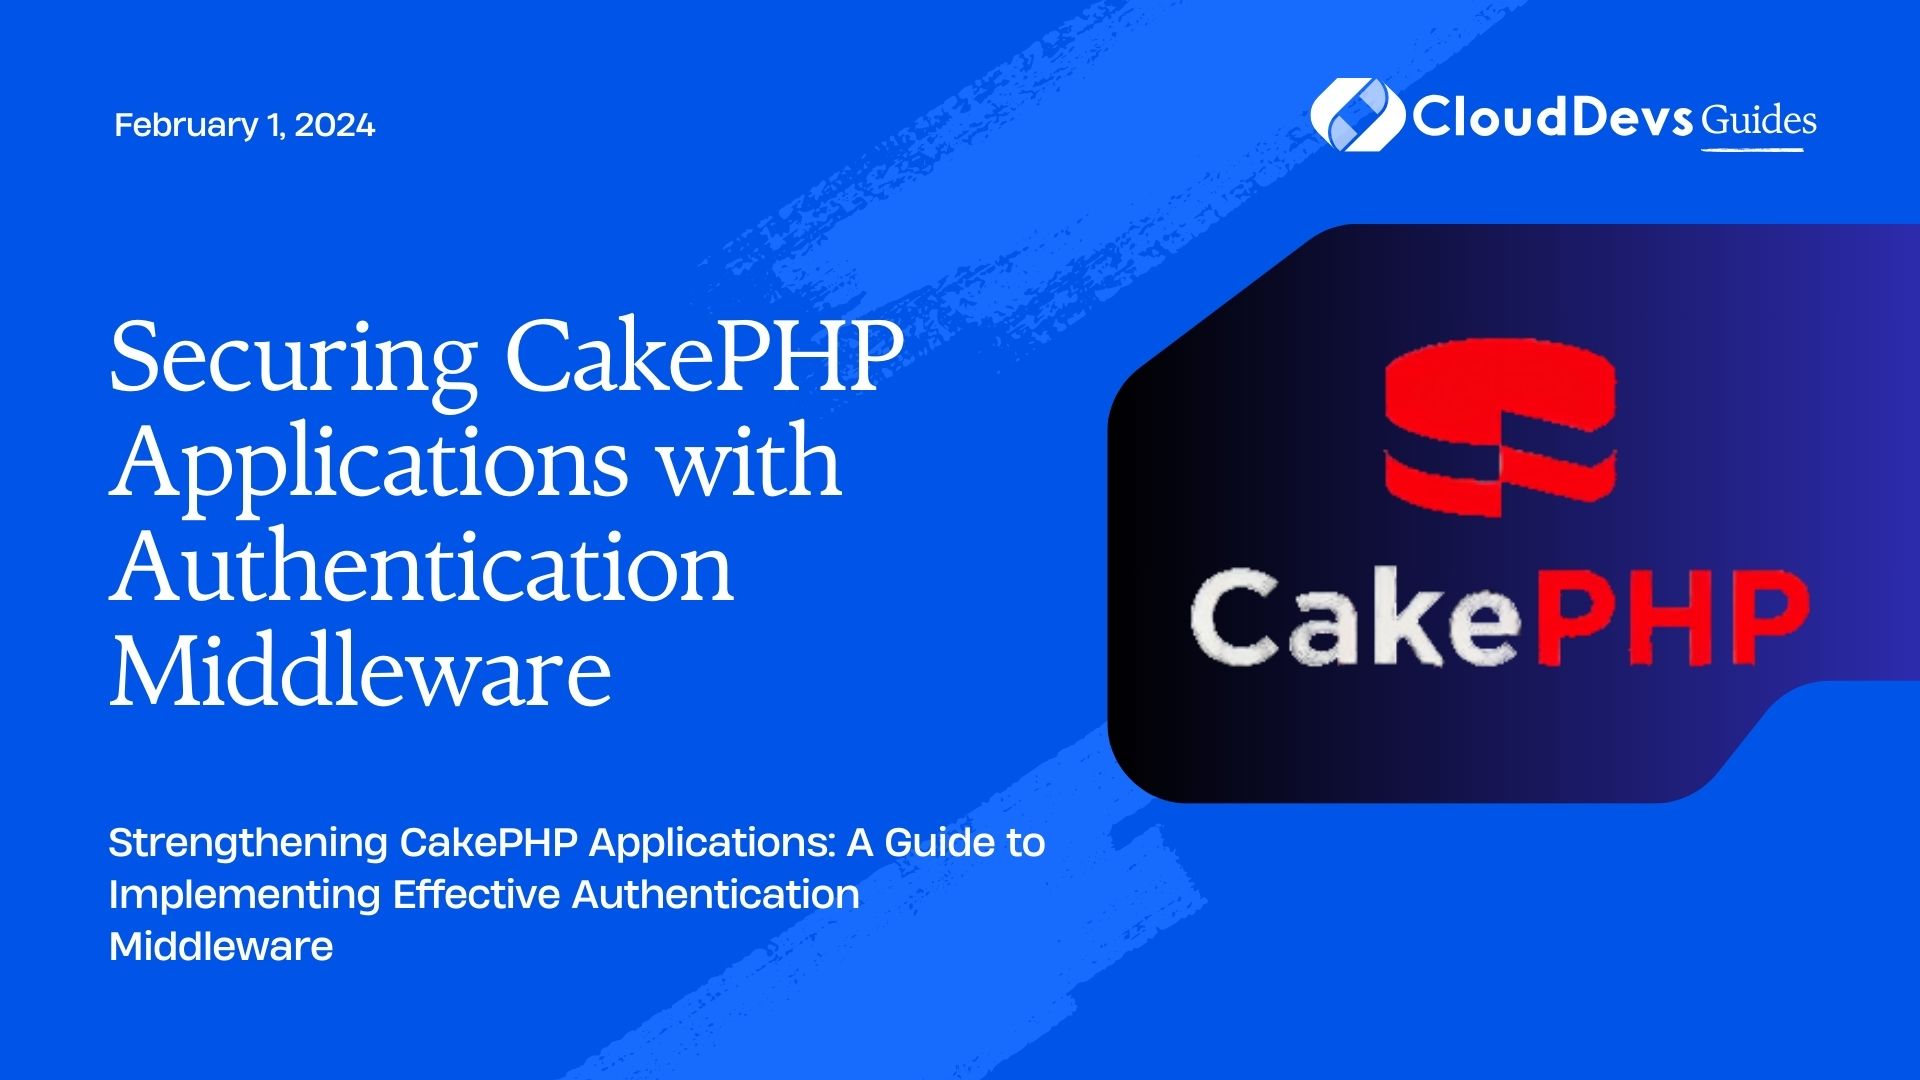 Securing CakePHP Applications with Authentication Middleware